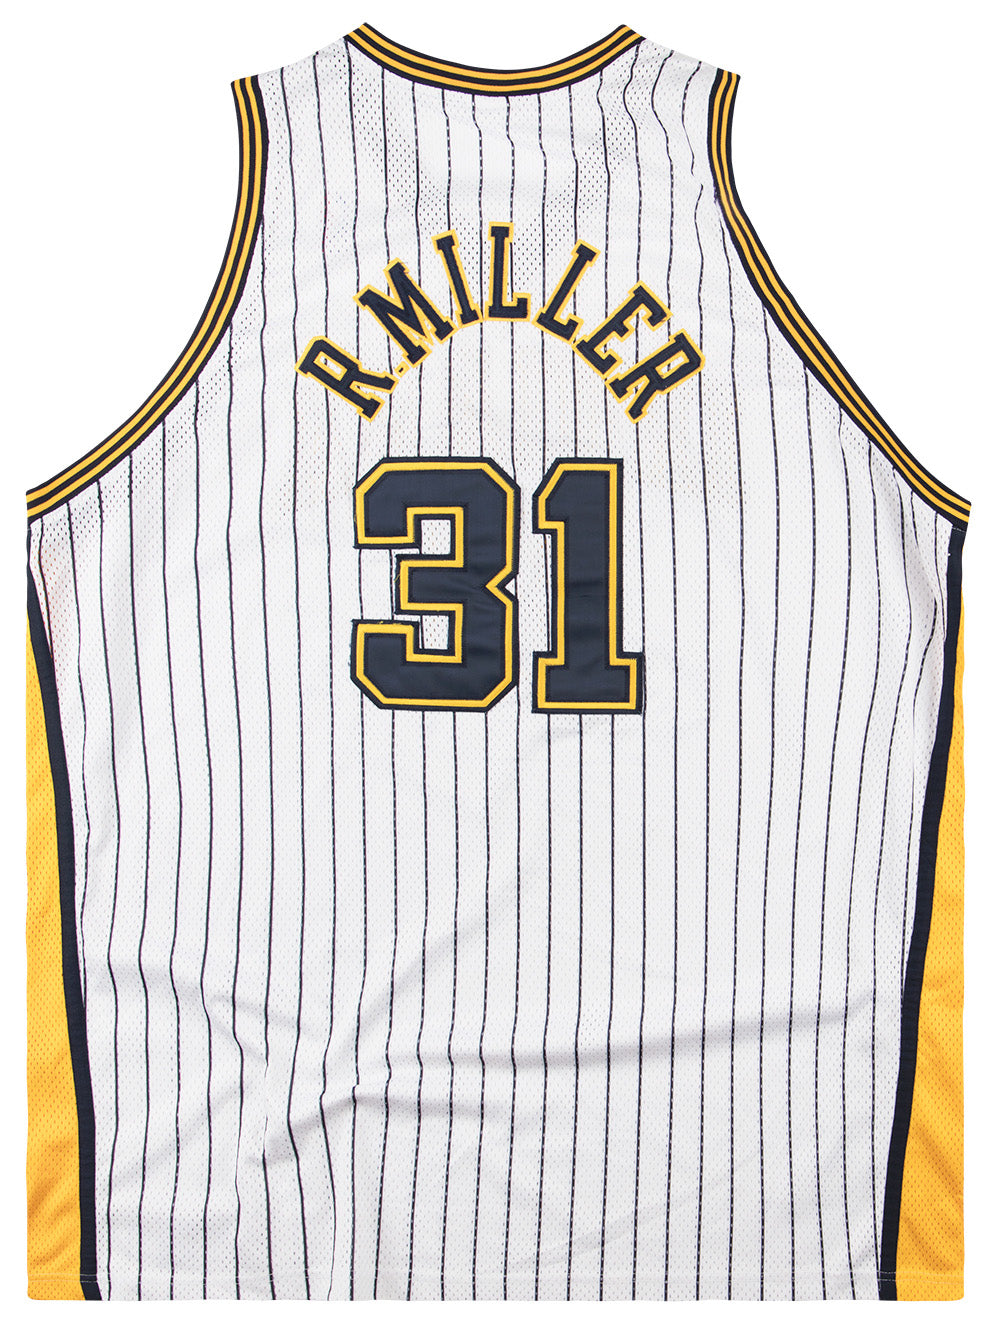 2001-05 AUTHENTIC INDIANA PACERS R. MILLER #31 REEBOK JERSEY (HOME) 4XL